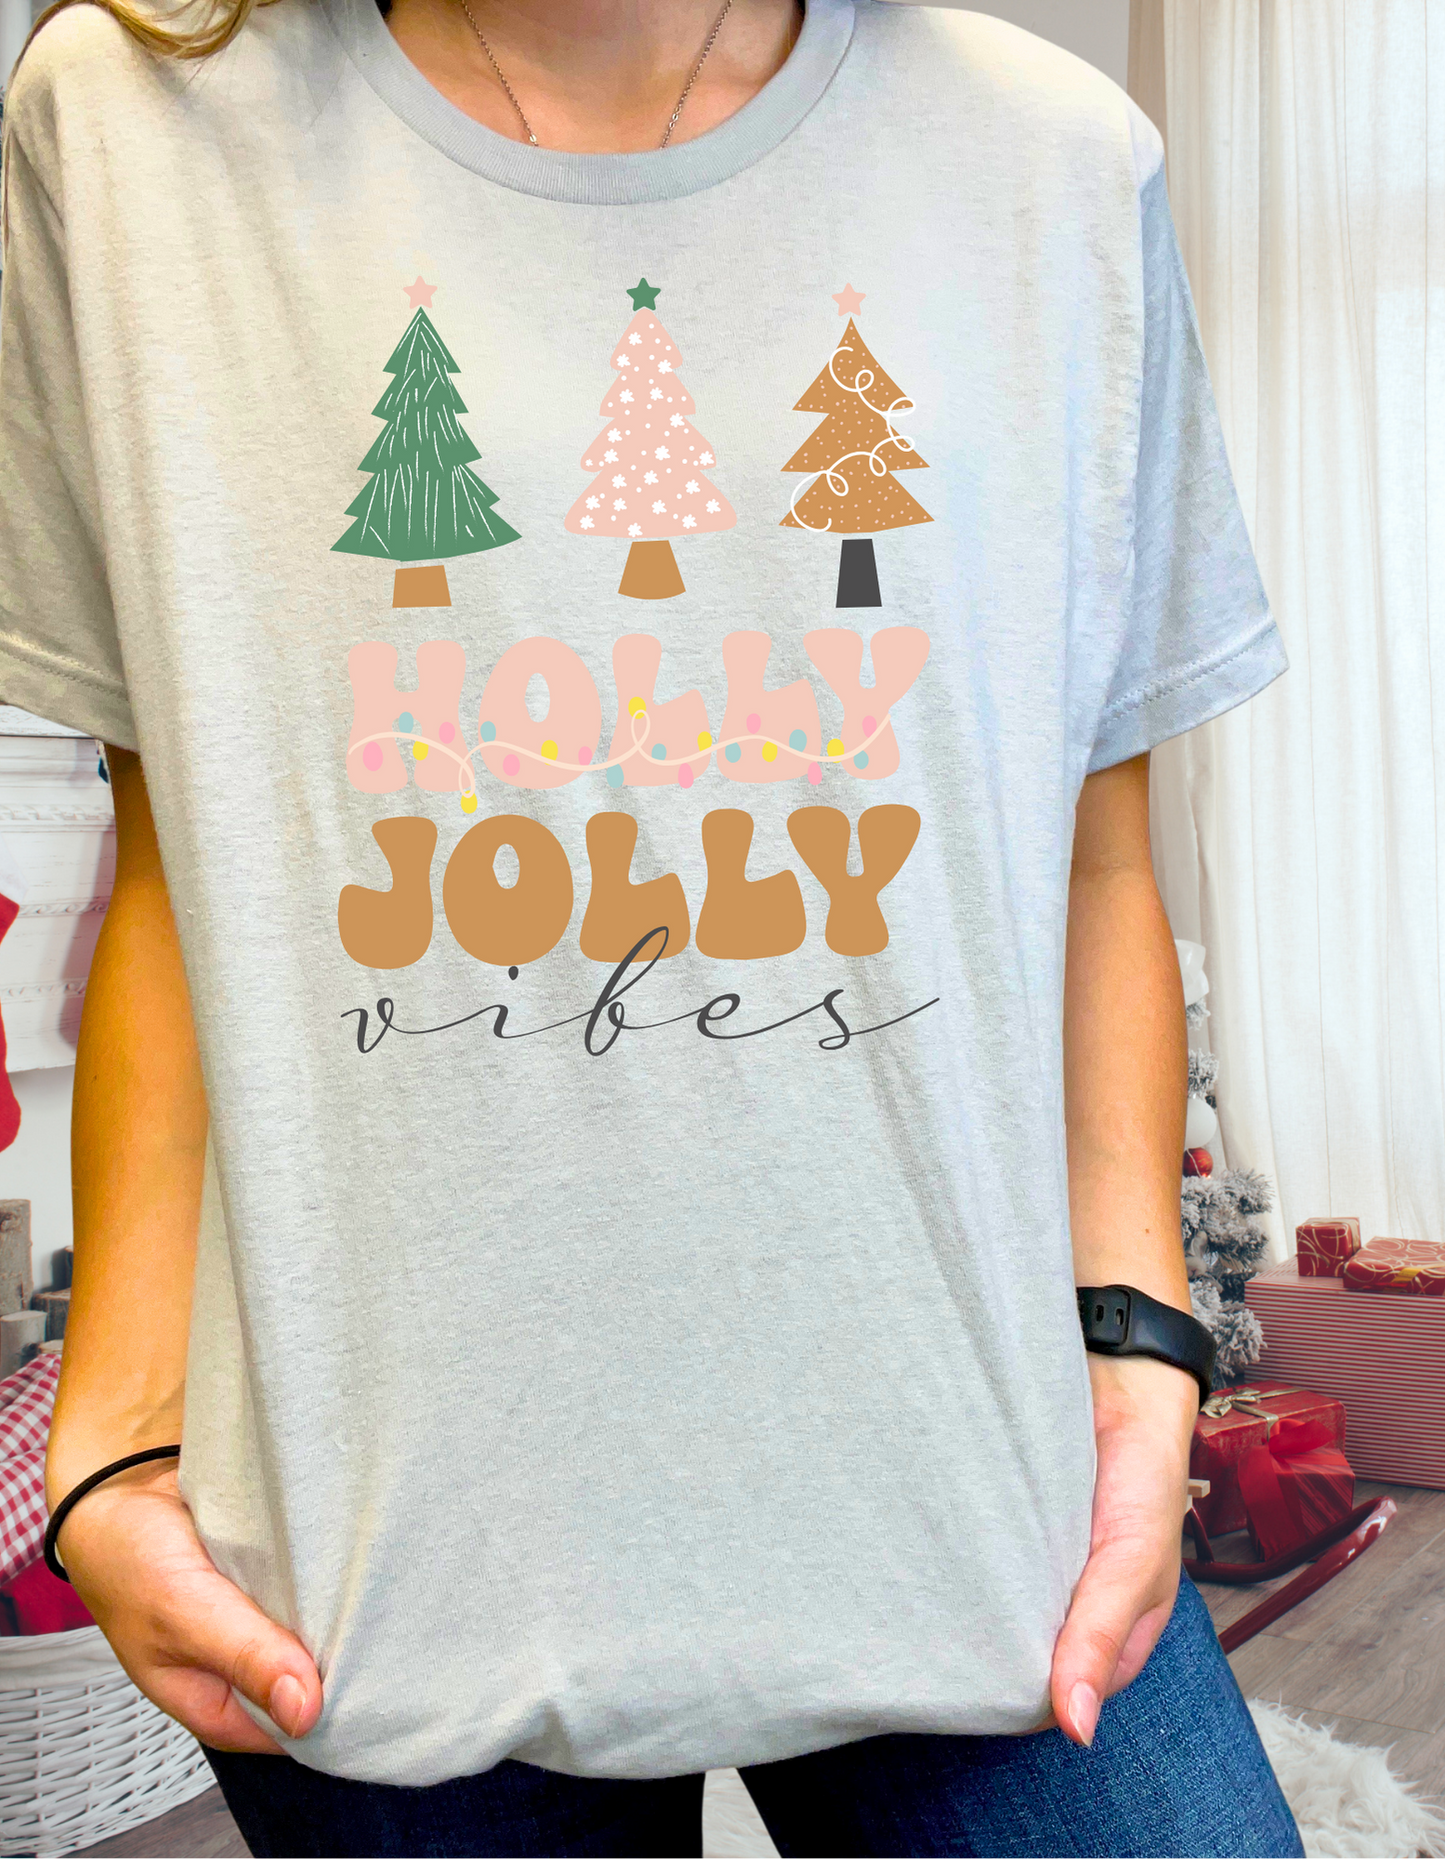 Holly Jolly Vibes, silver Tee